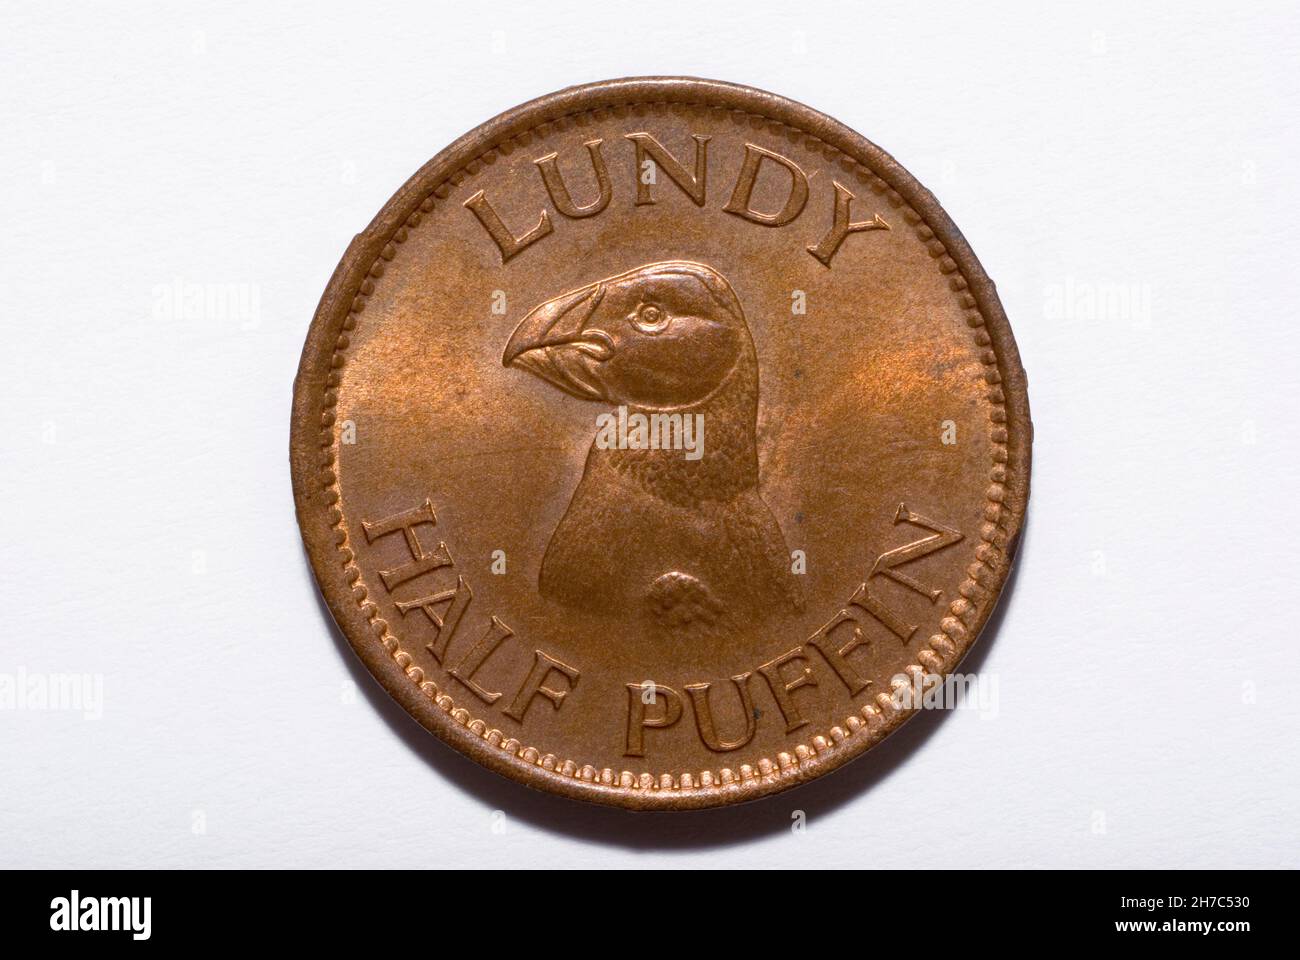 Island of Lundy Half Puffin Coin 1929 Stock Photo